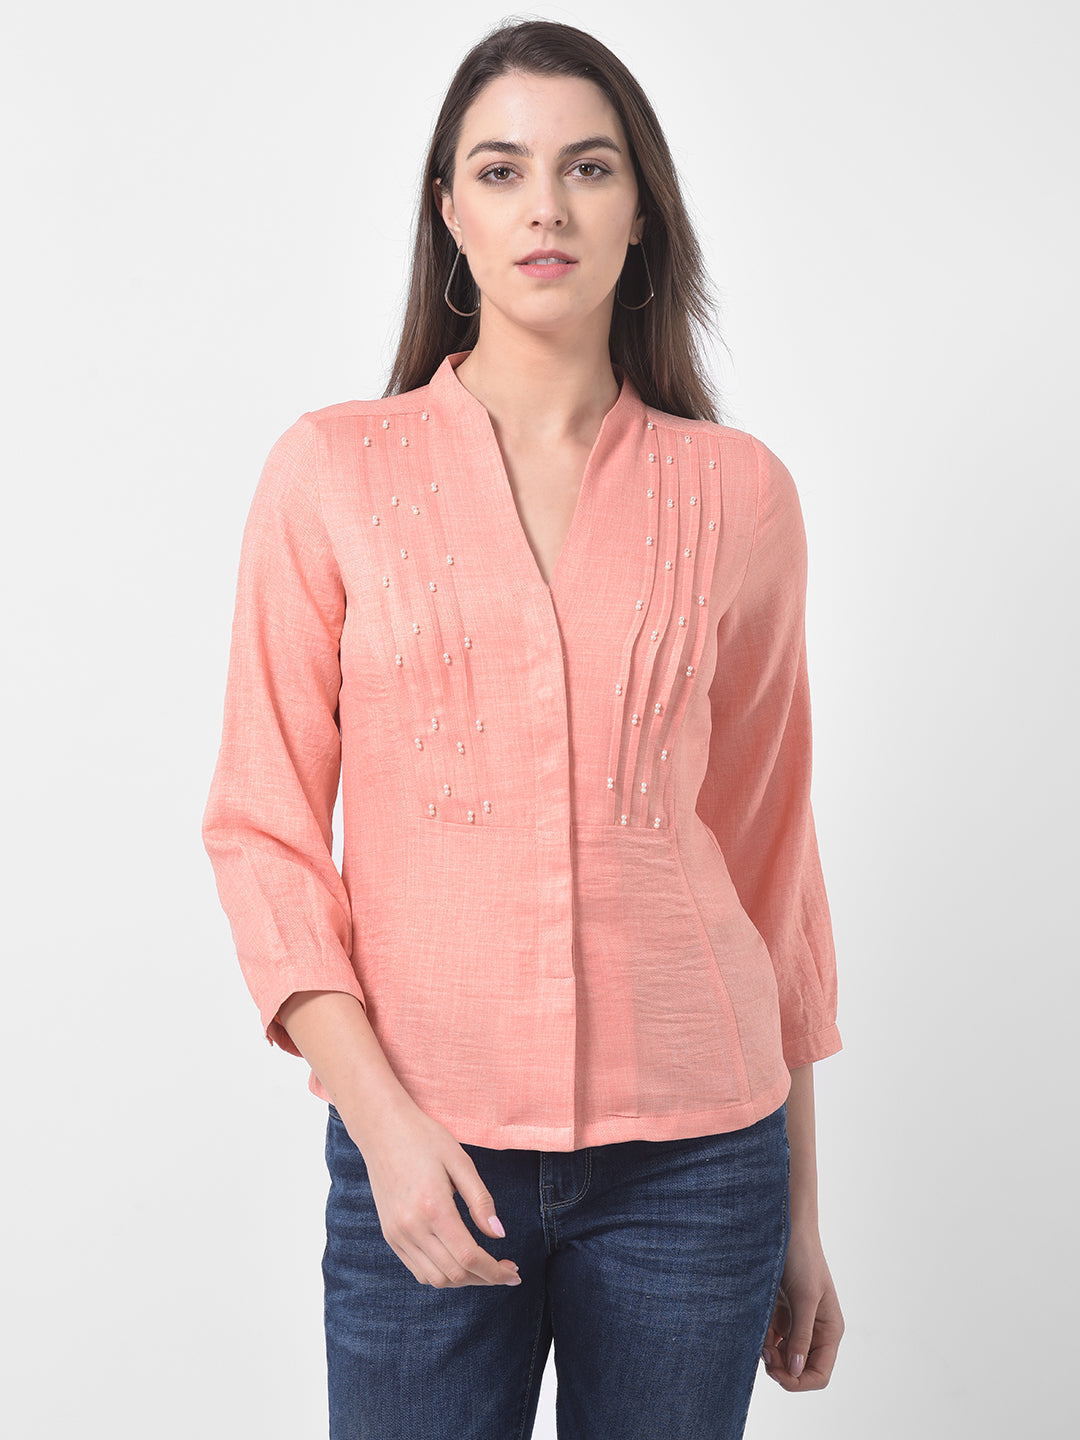 Peach 3/4 Sleeve Blouse With Pearl